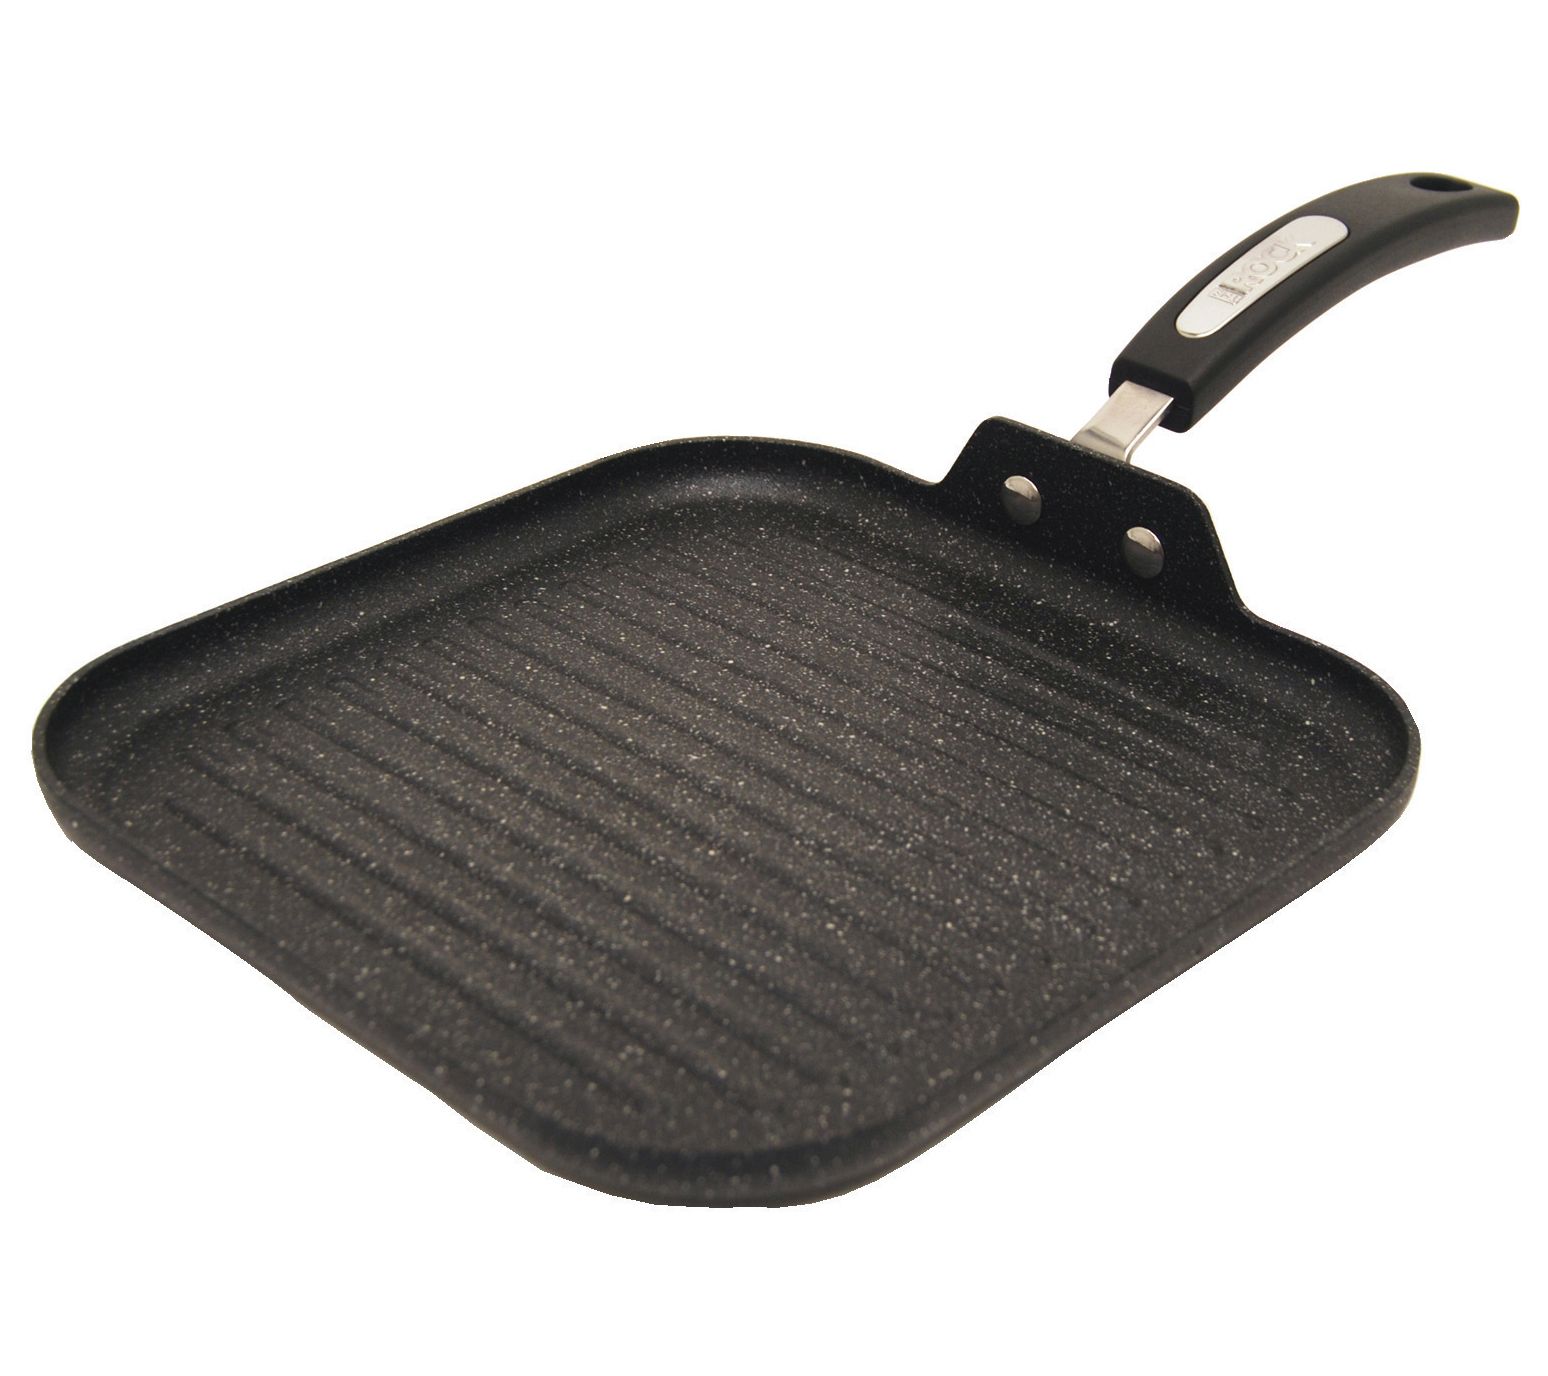 Starfrit - The Rock Essentials Black 11 Forged Aluminum Frying Pan